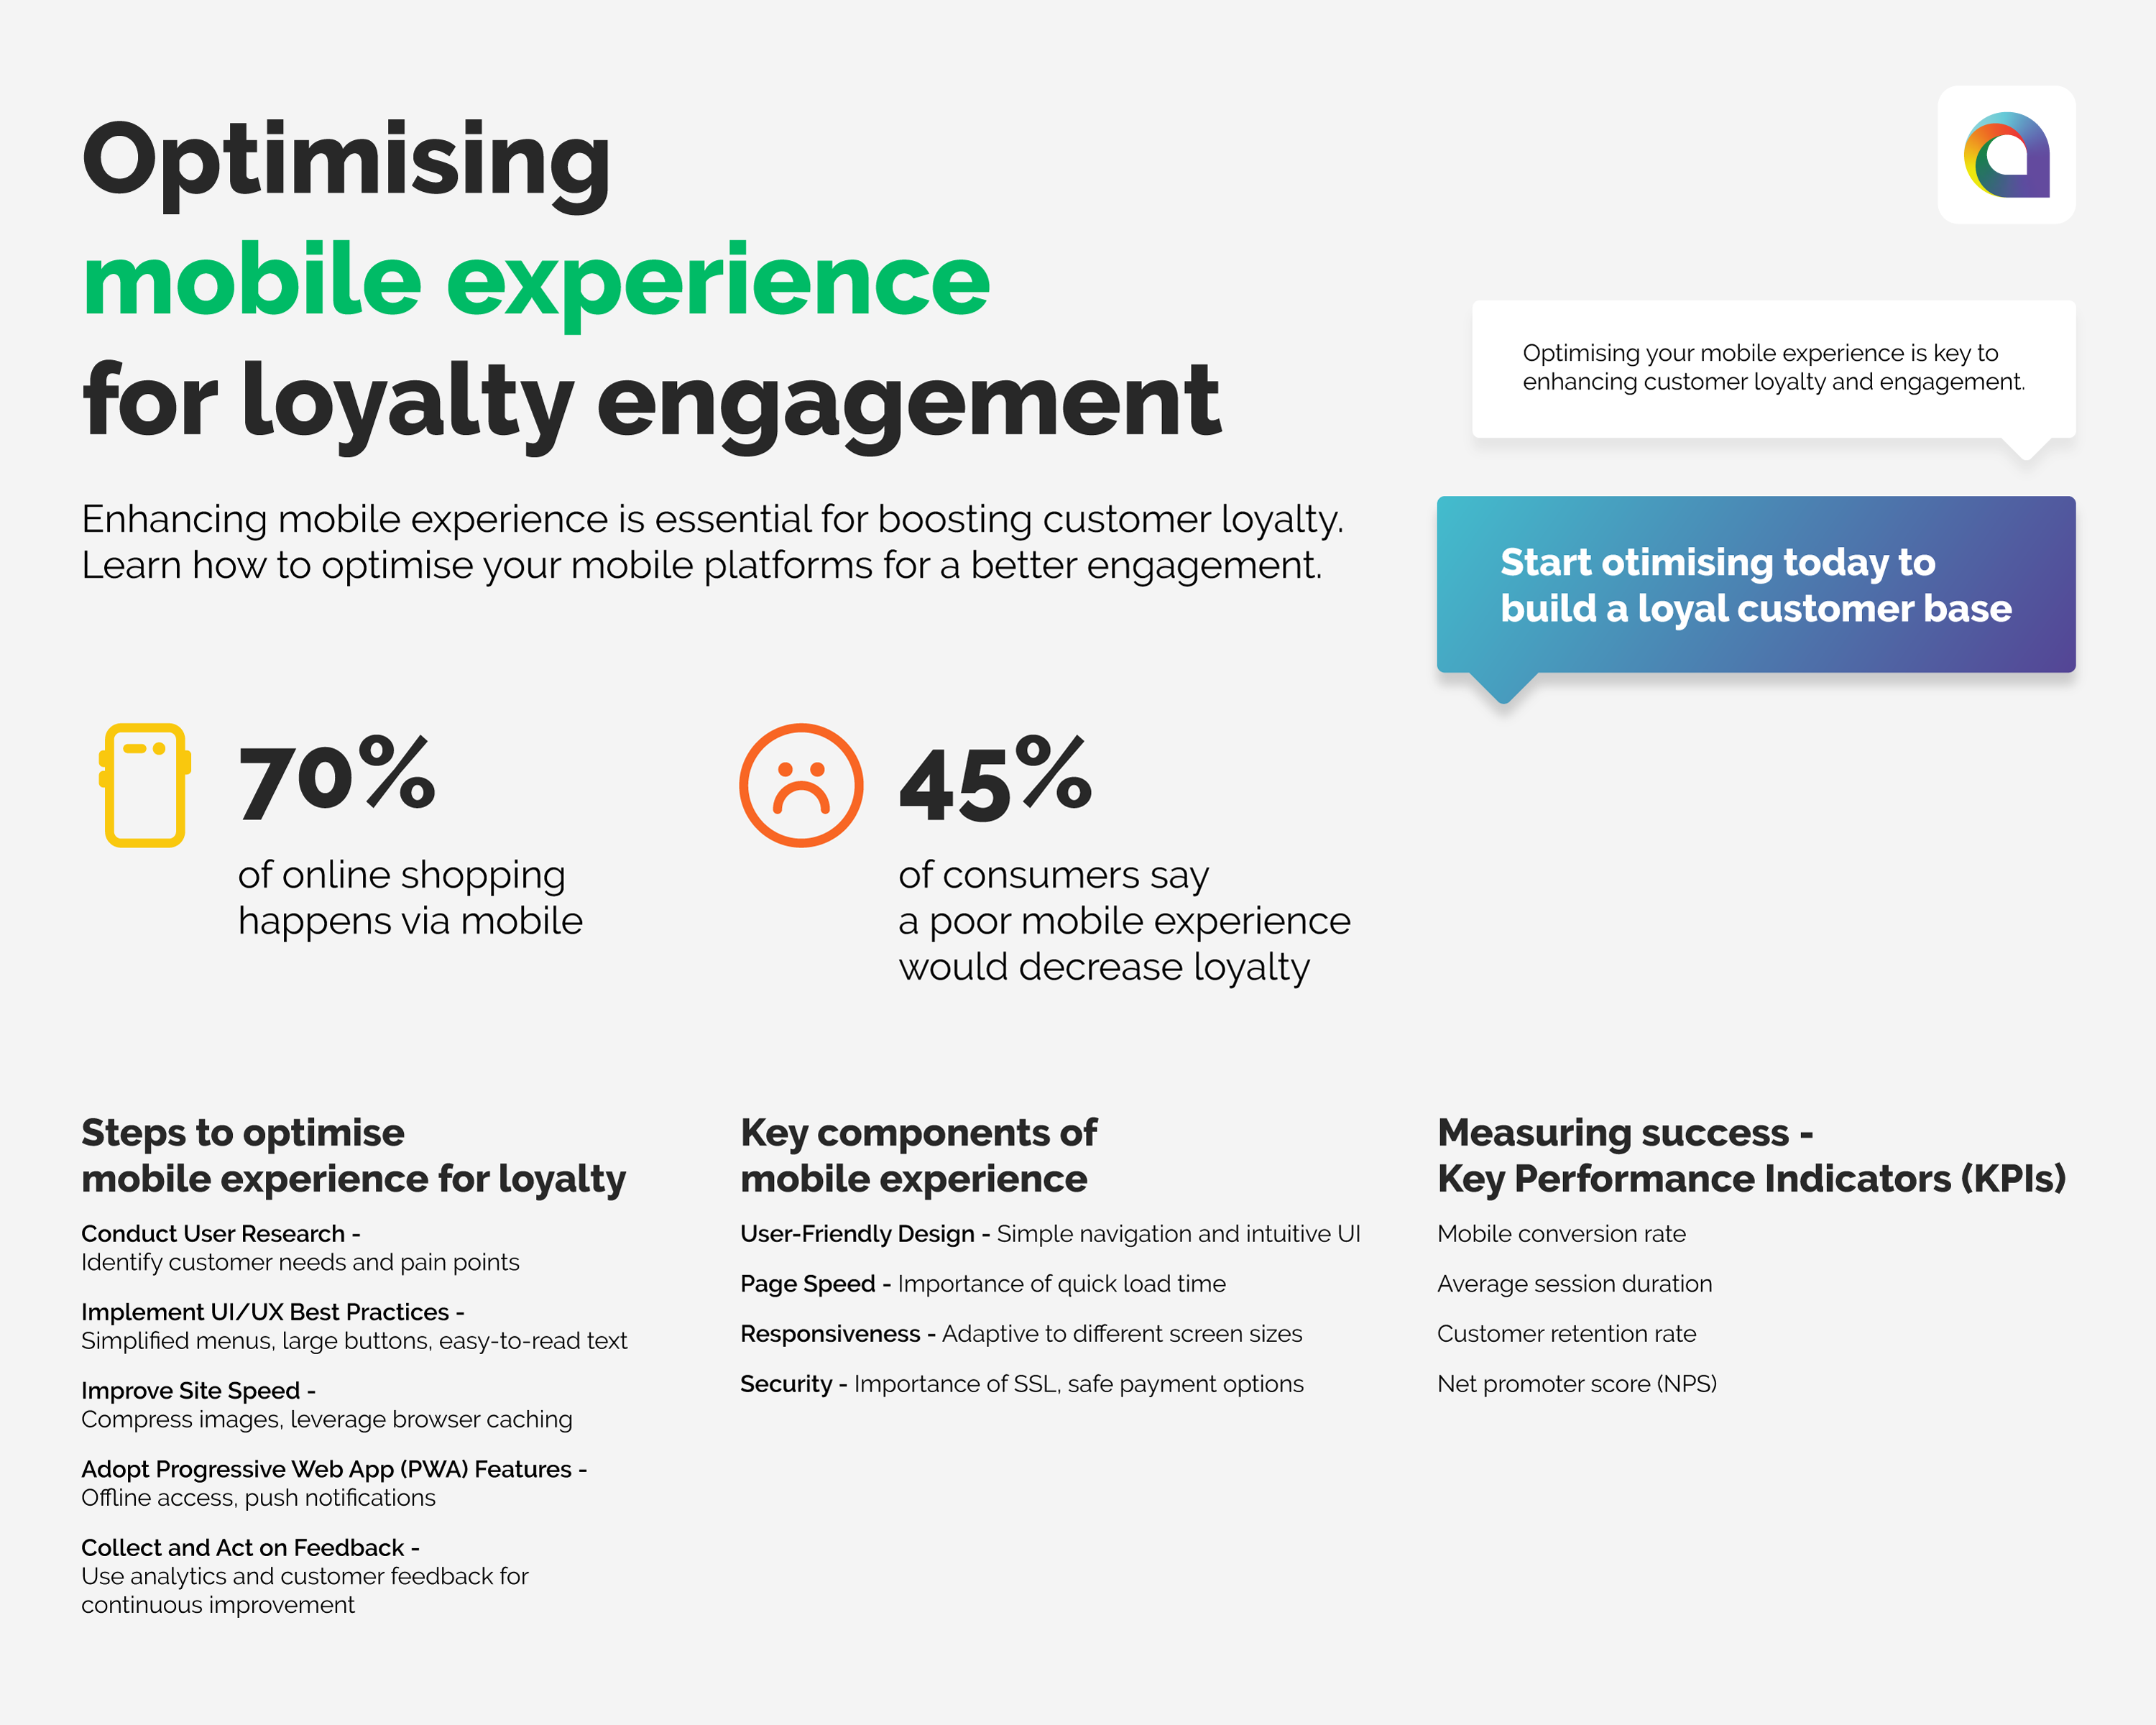 Optimising Mobile Experience for Loyalty Engagement